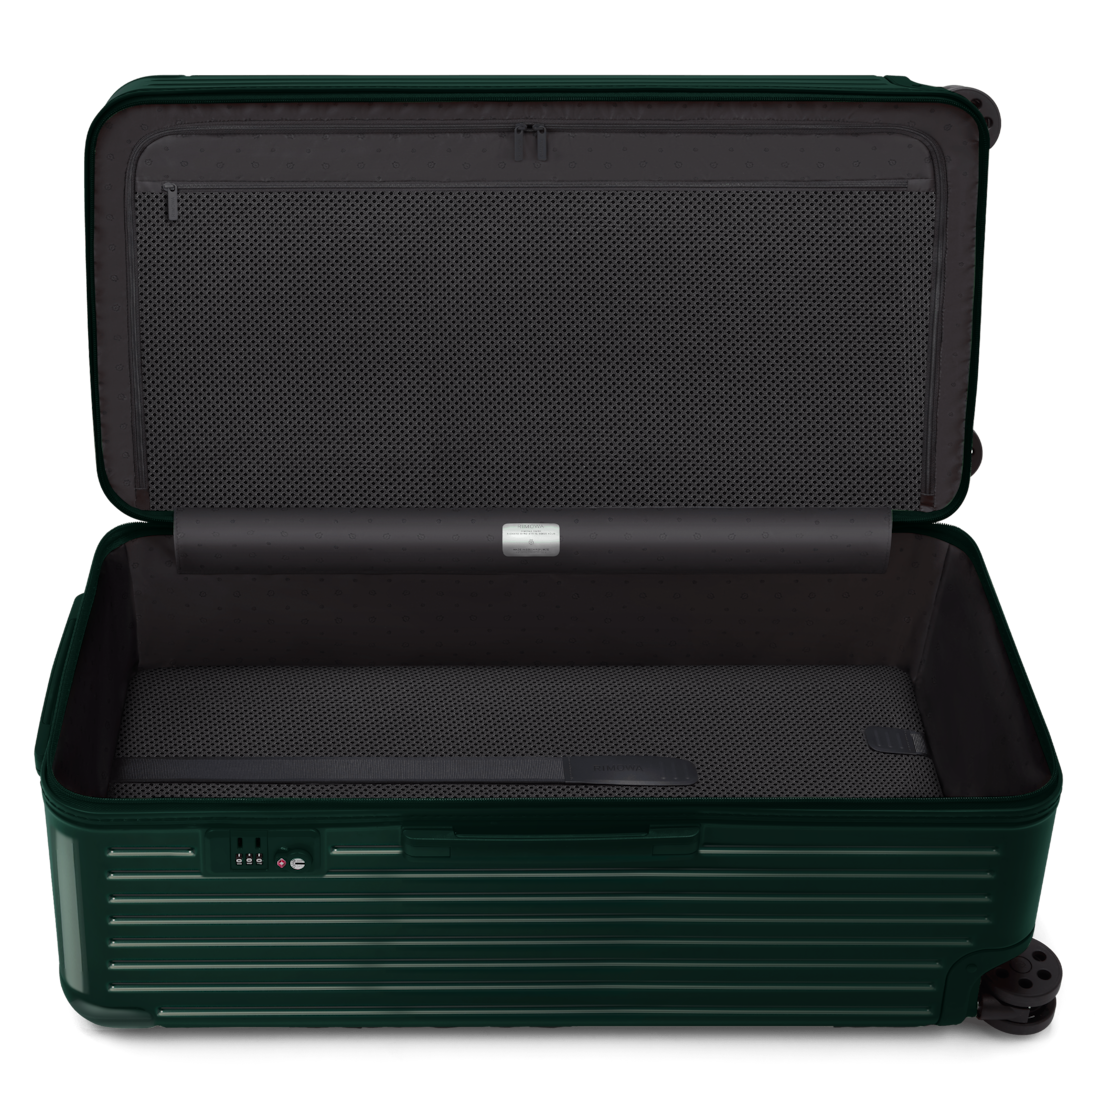 Applicable to Rimowa Luggage and Suitcase Sets of Rimowa 26/28/30-Inch  Bossa Nova